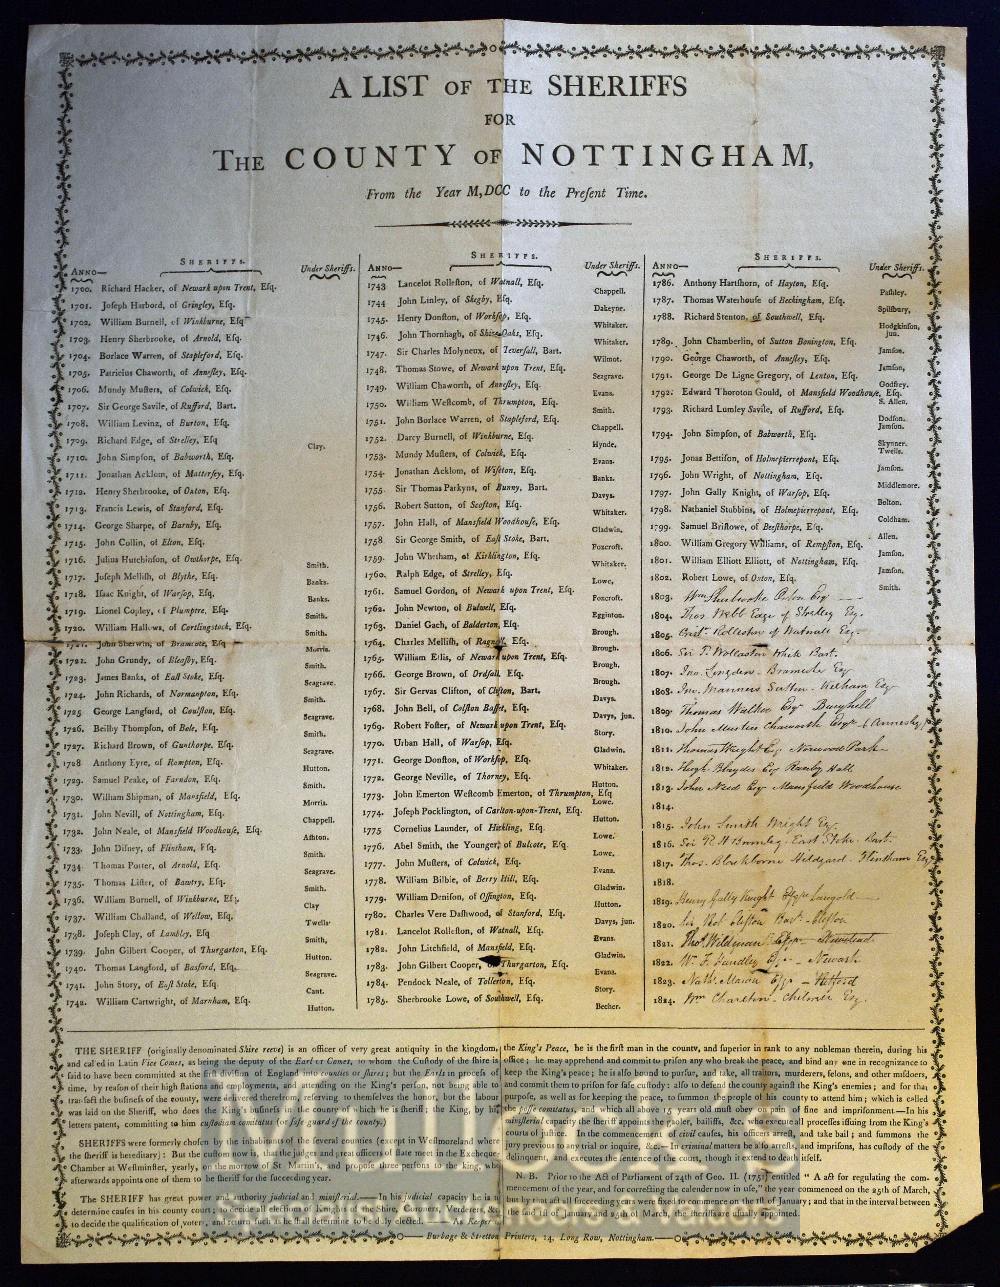 Nottingham Broadside 1802 - A List of the Sheriffs for the county of Nottingham, From the Year